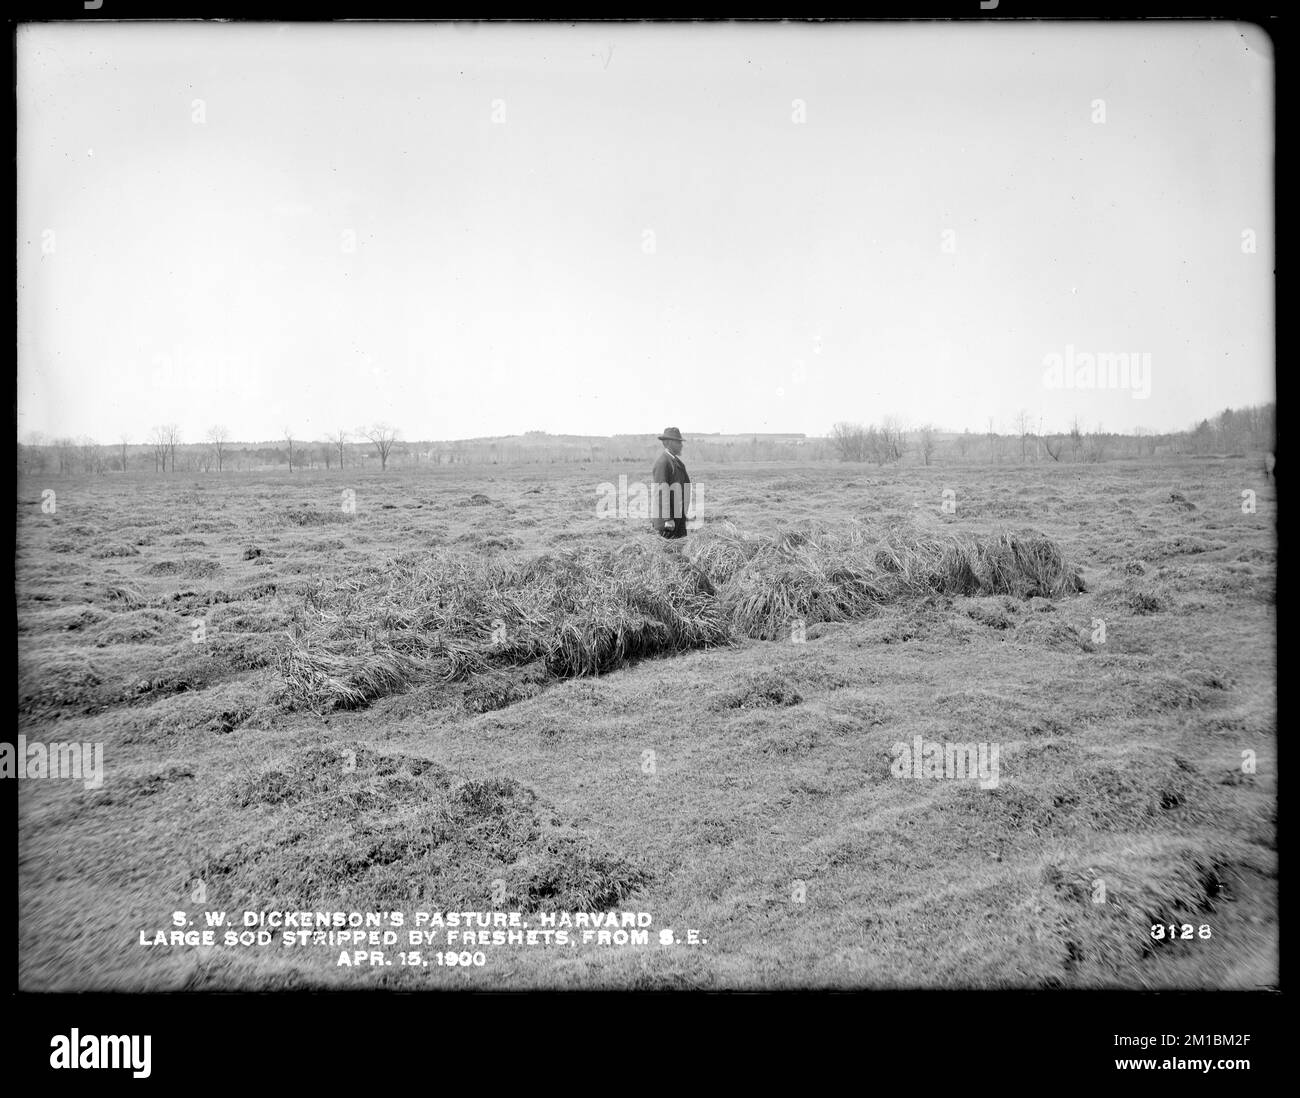 Wachusett Reservoir, S. W. Dickinson's pasture, large sod stripped by freshets, from the southeast, Harvard, Mass., Apr. 15, 1900 , waterworks, reservoirs water distribution structures, watershed sanitary improvement Stock Photo